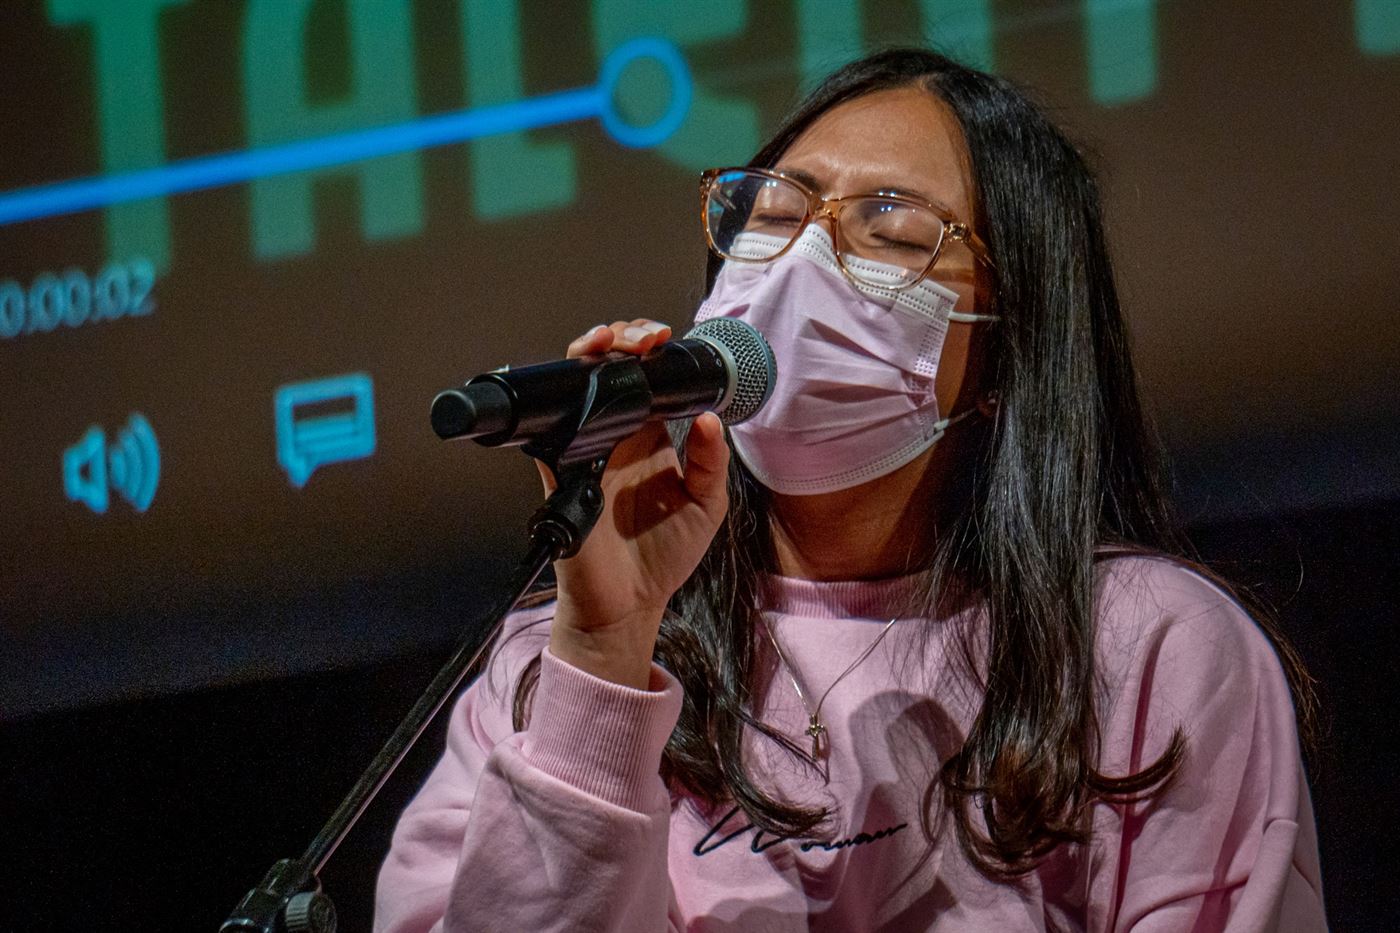 Melanie Lopez, a freshman journalism and digital media major, sings “Killing me Softly,” by Lauryn Hill and The Fugees. Lynise Olivacce | The Montclarion